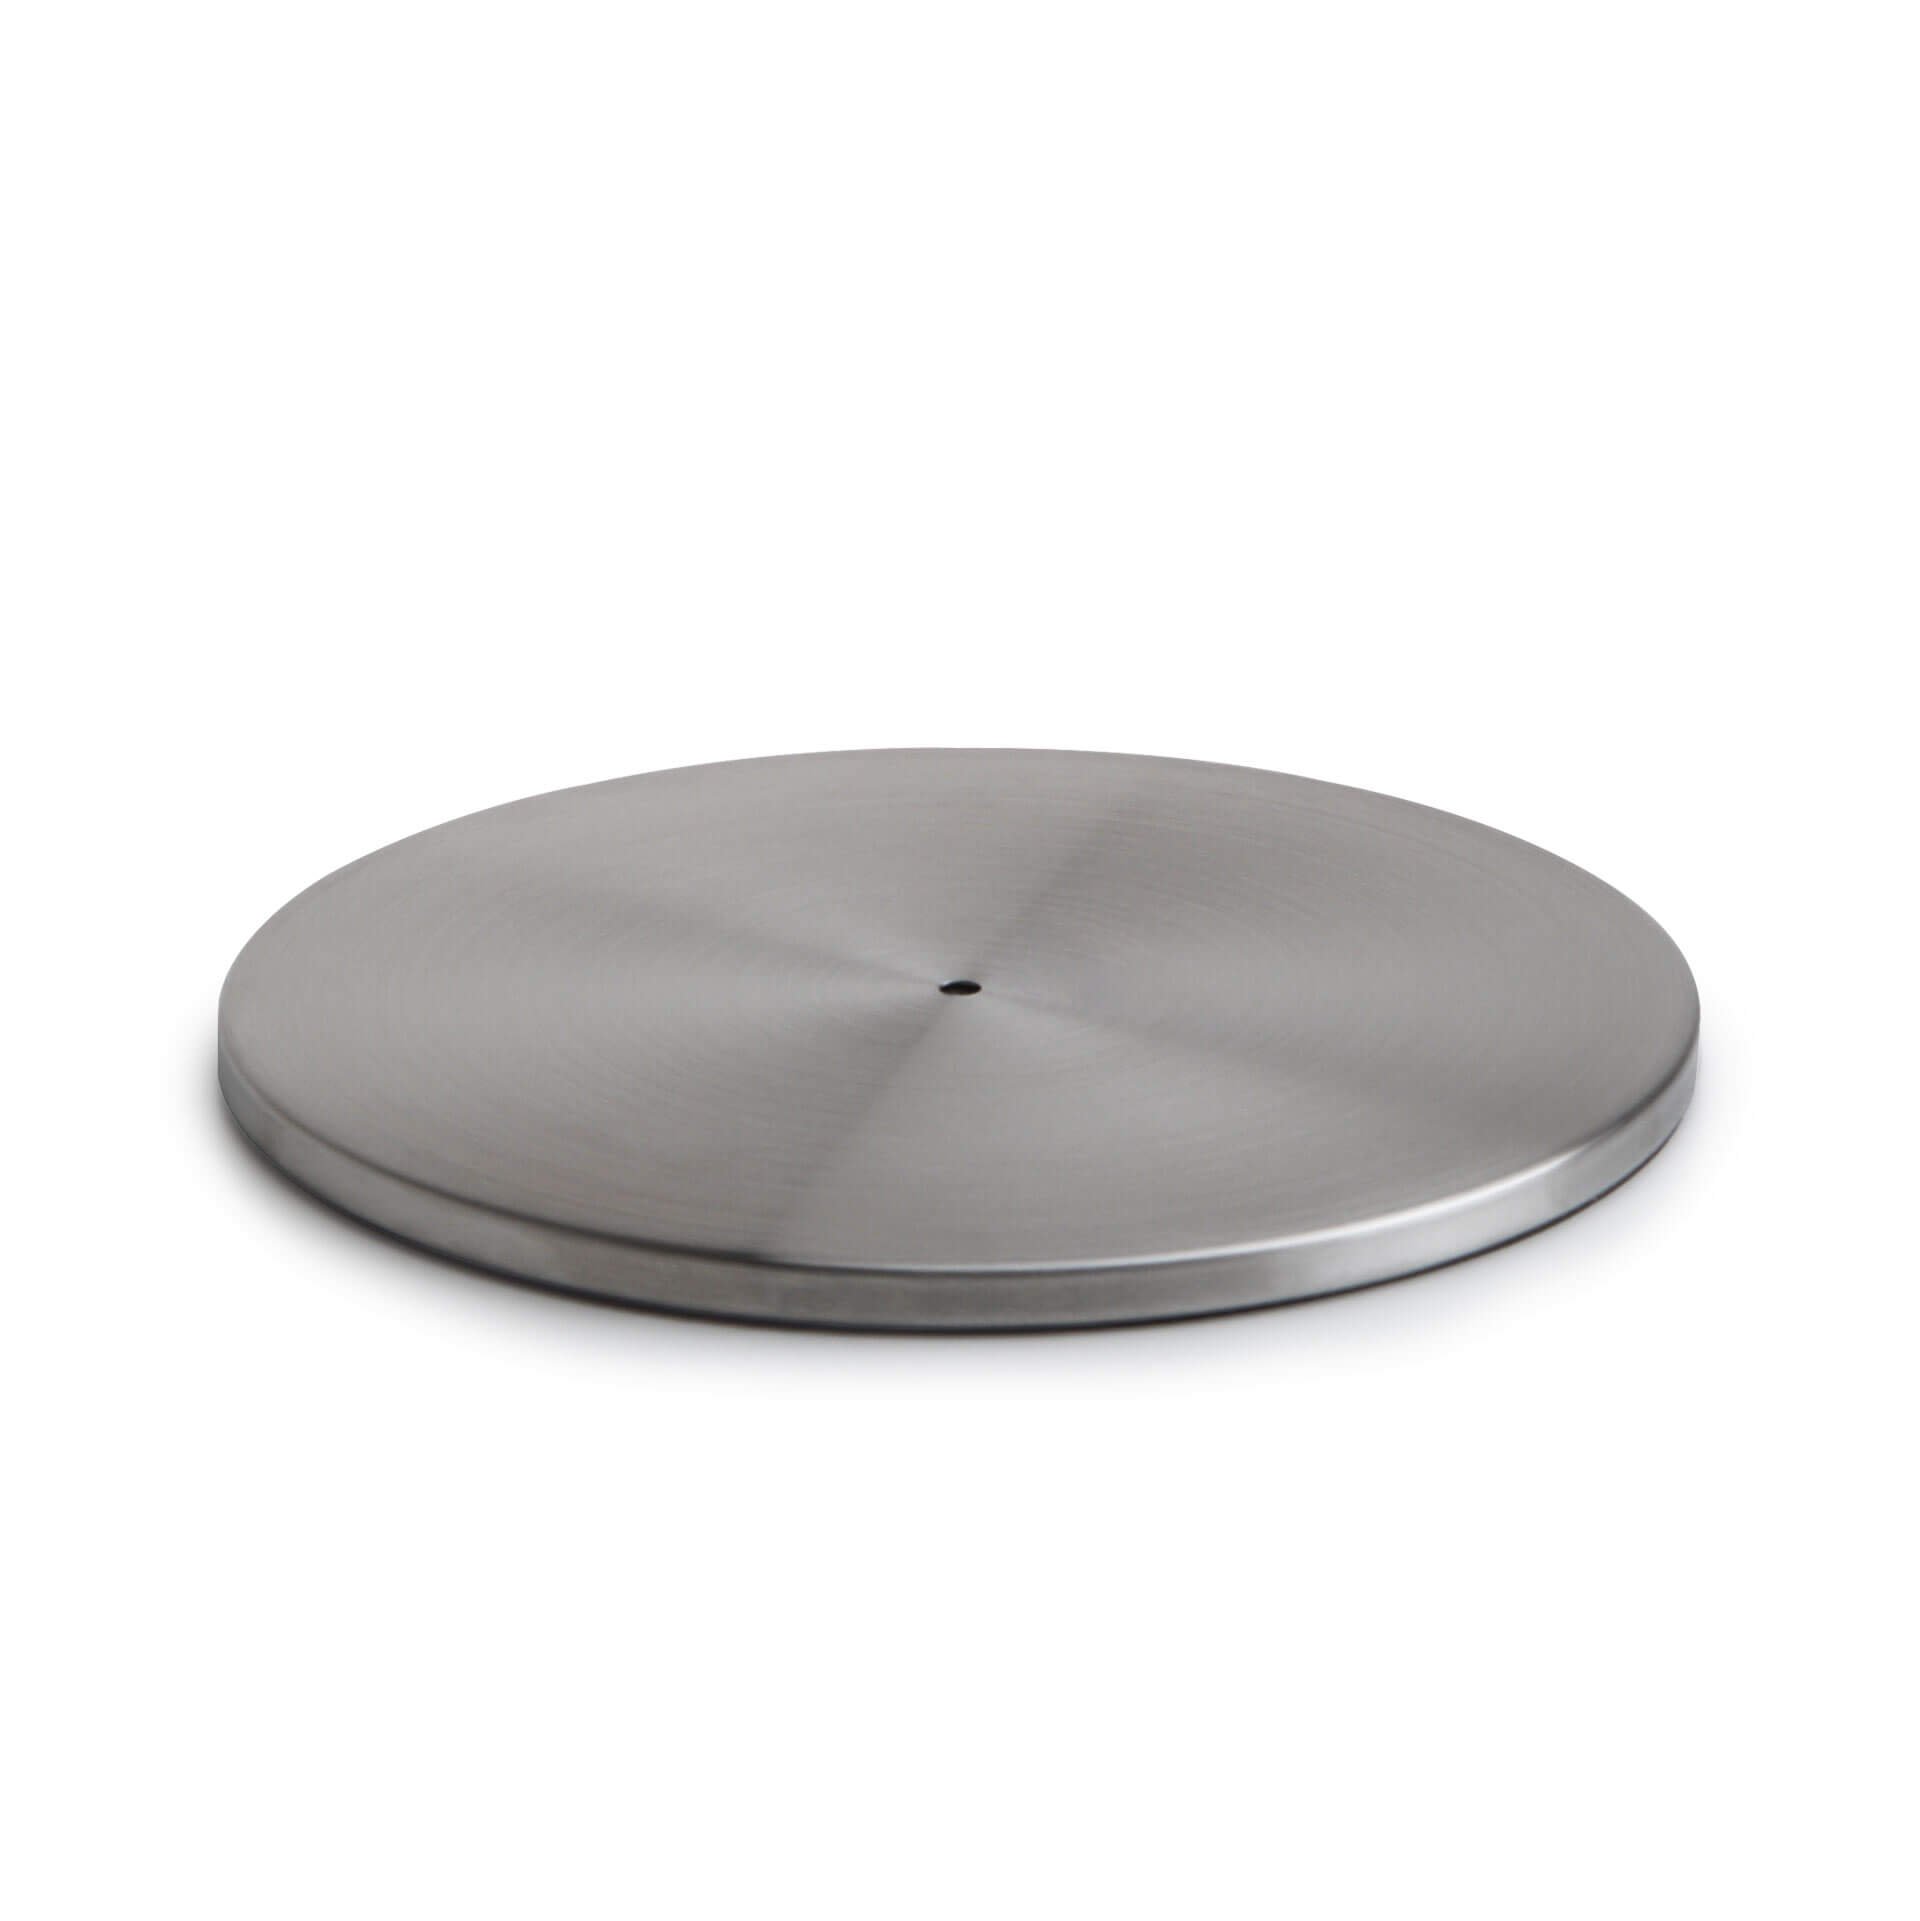 SPIN GROUND SPIKE Stainless steel Accessory for fireplace By höfats